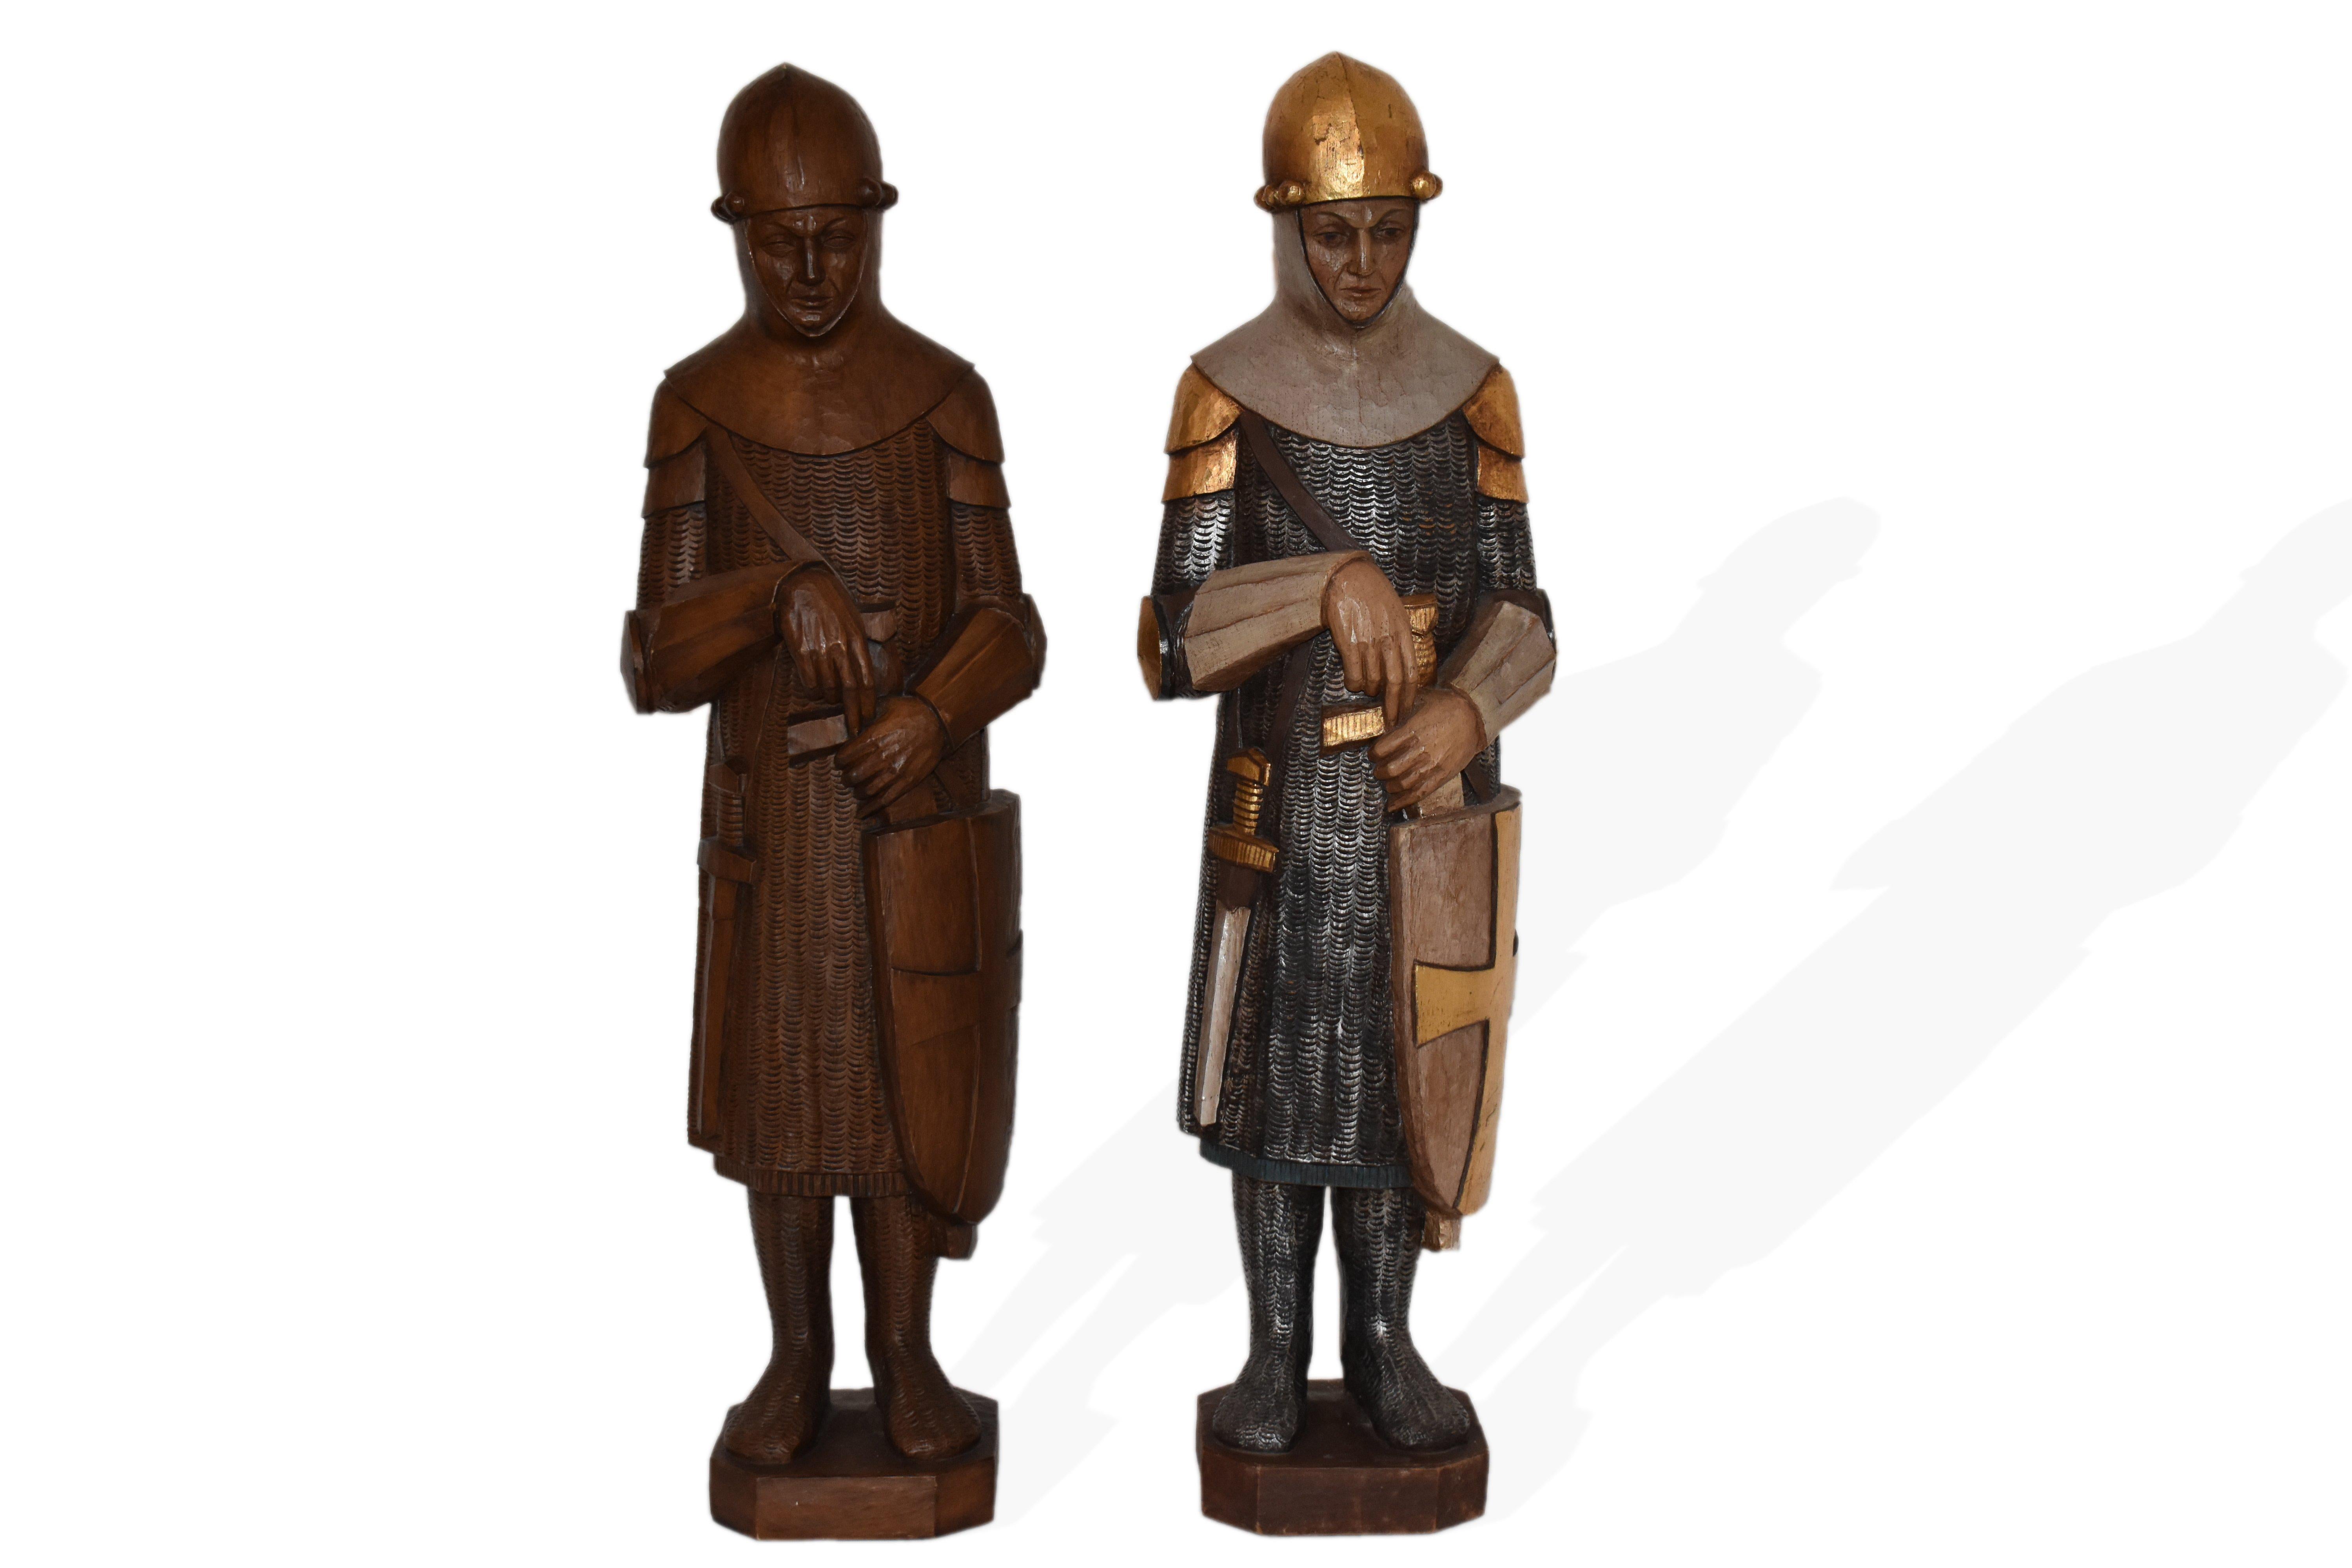 FINAL SALE Large Medieval Crusader Knight Sculptures, Carved Wood and Polychrome For Sale 1